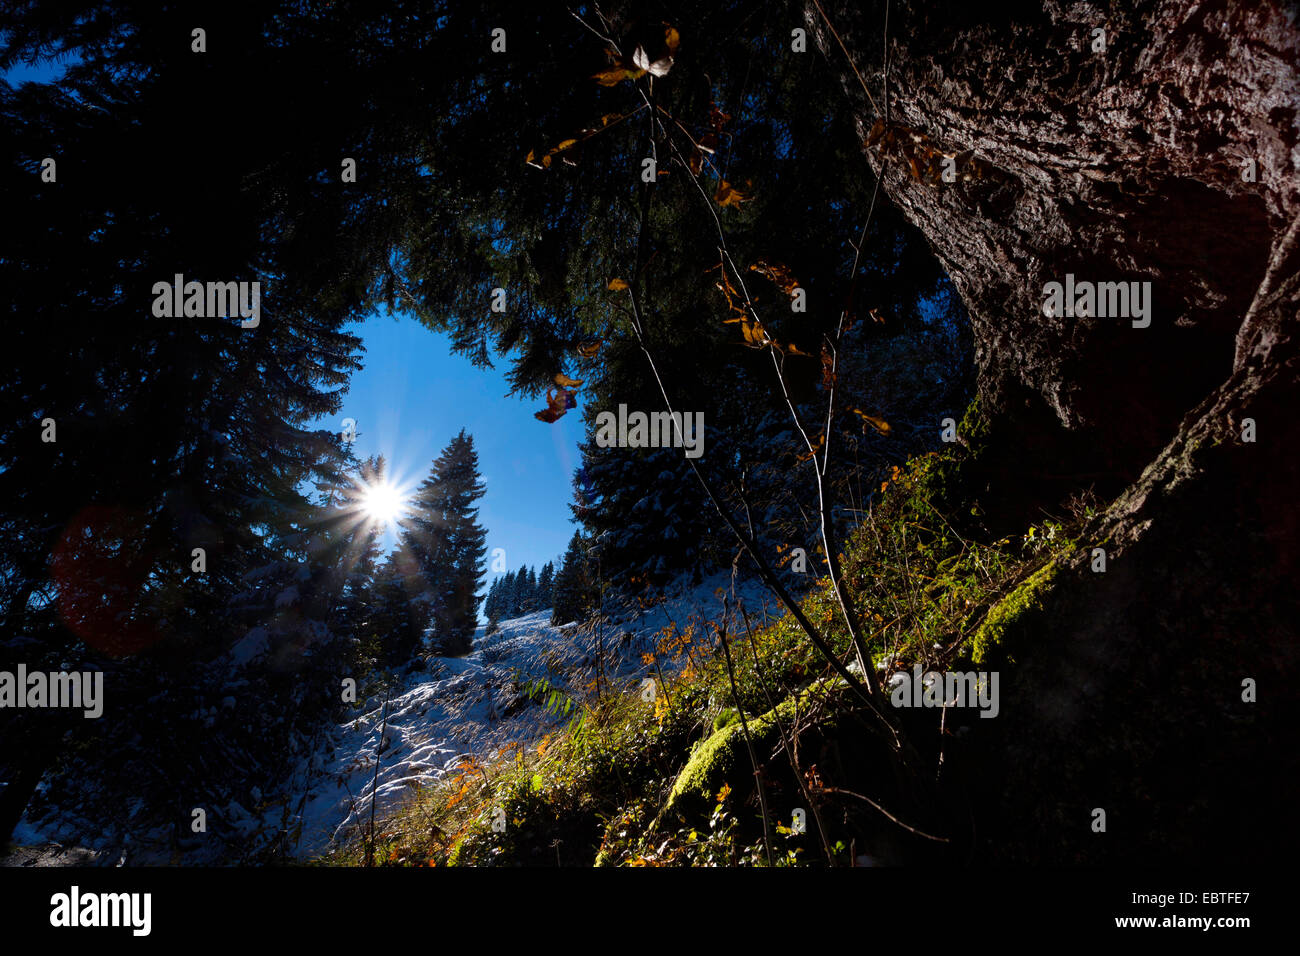 mountain slope and coniferous forest in backlight, Switzerland, Kanton Schwyz, Ibach Stock Photo